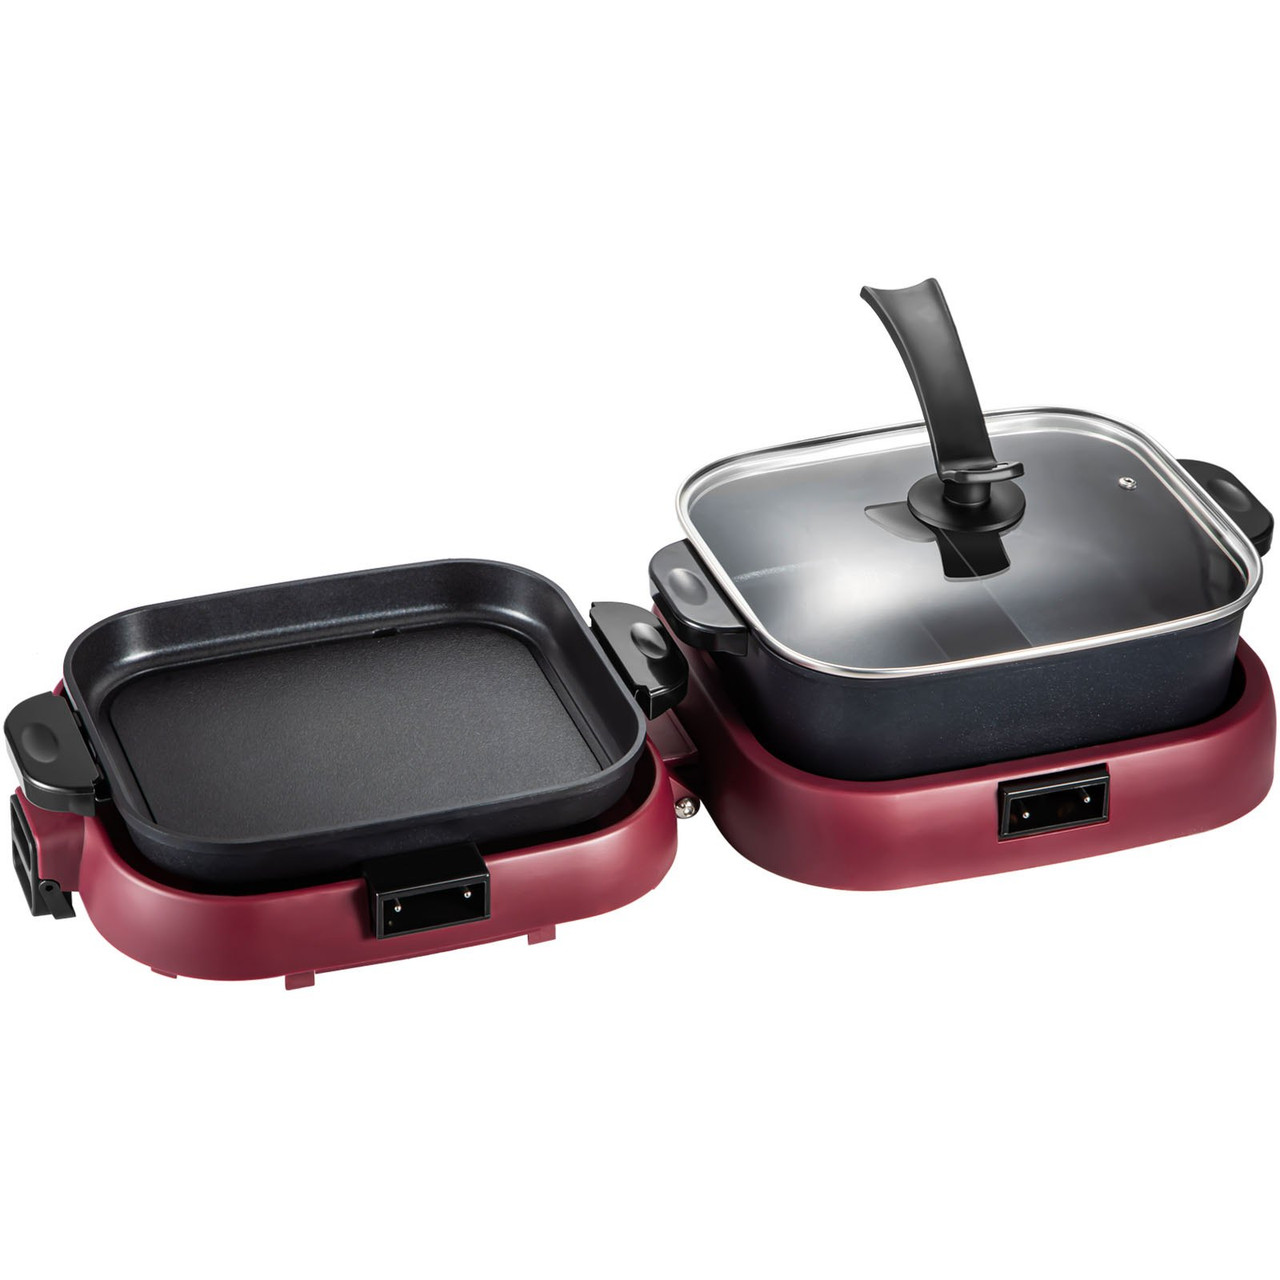 VEVOR 2 in 1 Electric Grill and Hot Pot BBQ Pan Grill and Hot Pot